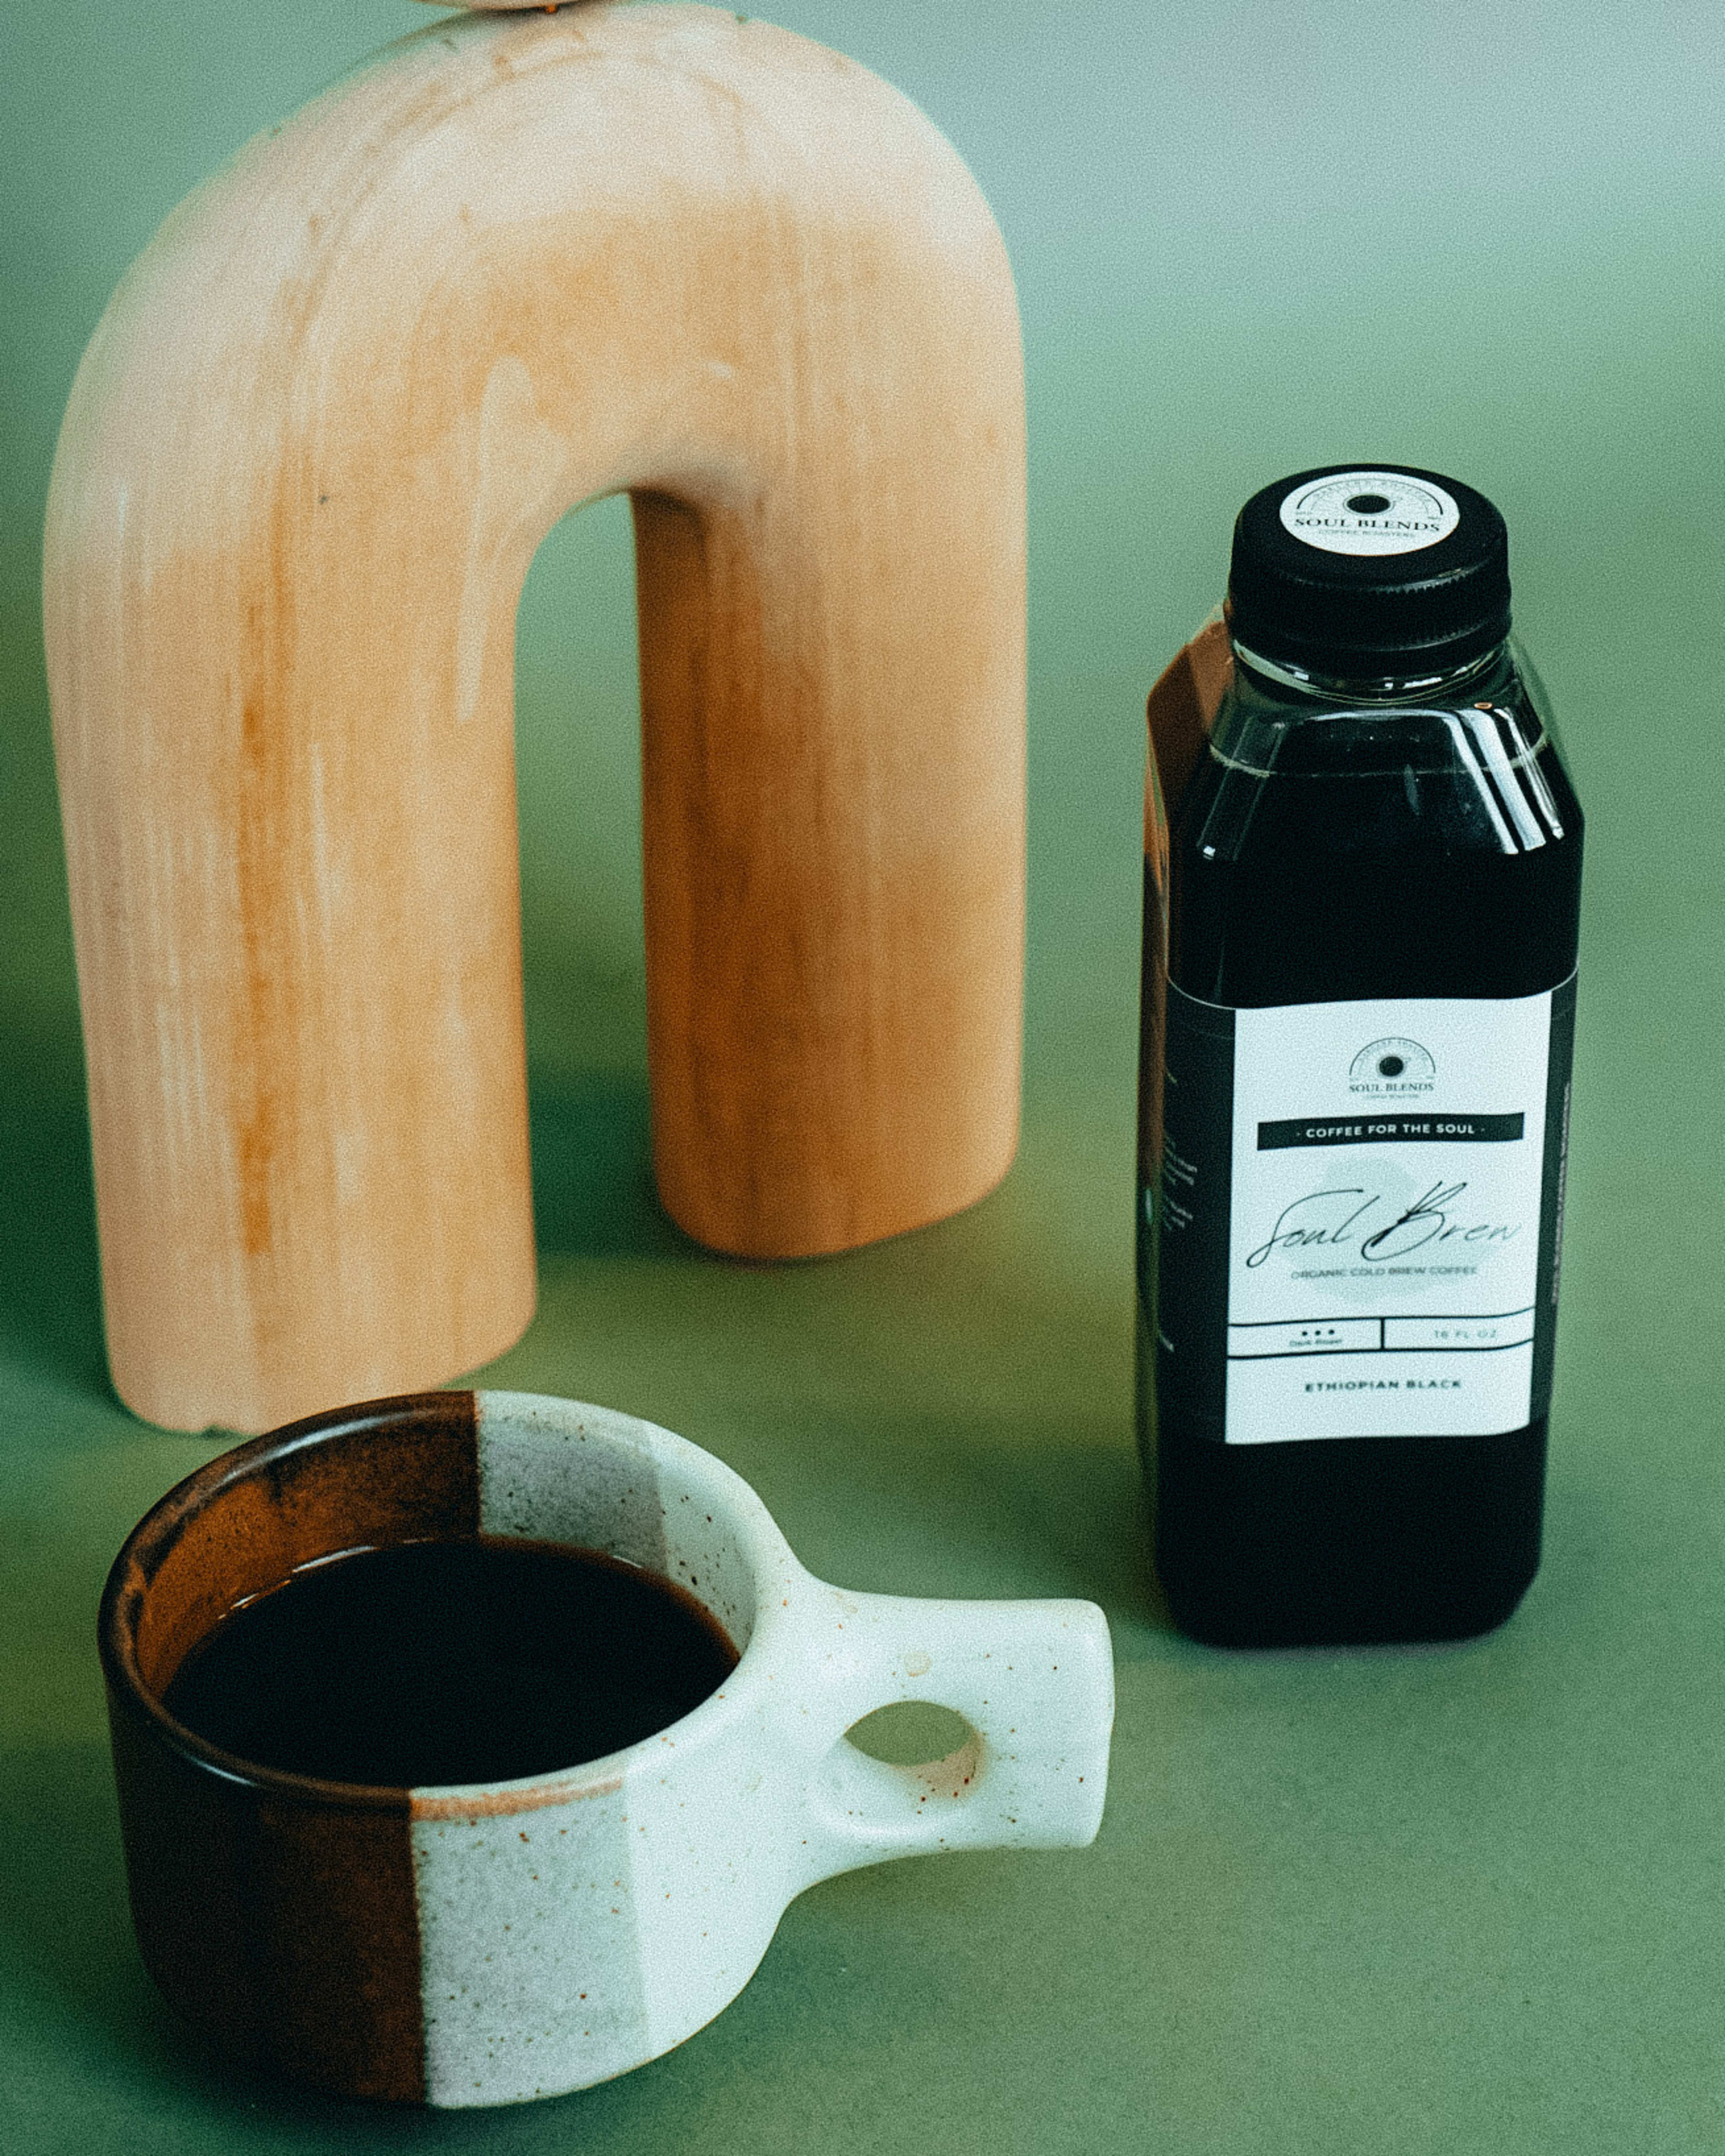 A wooden object next to a cup of coffee for a product photo shoot.